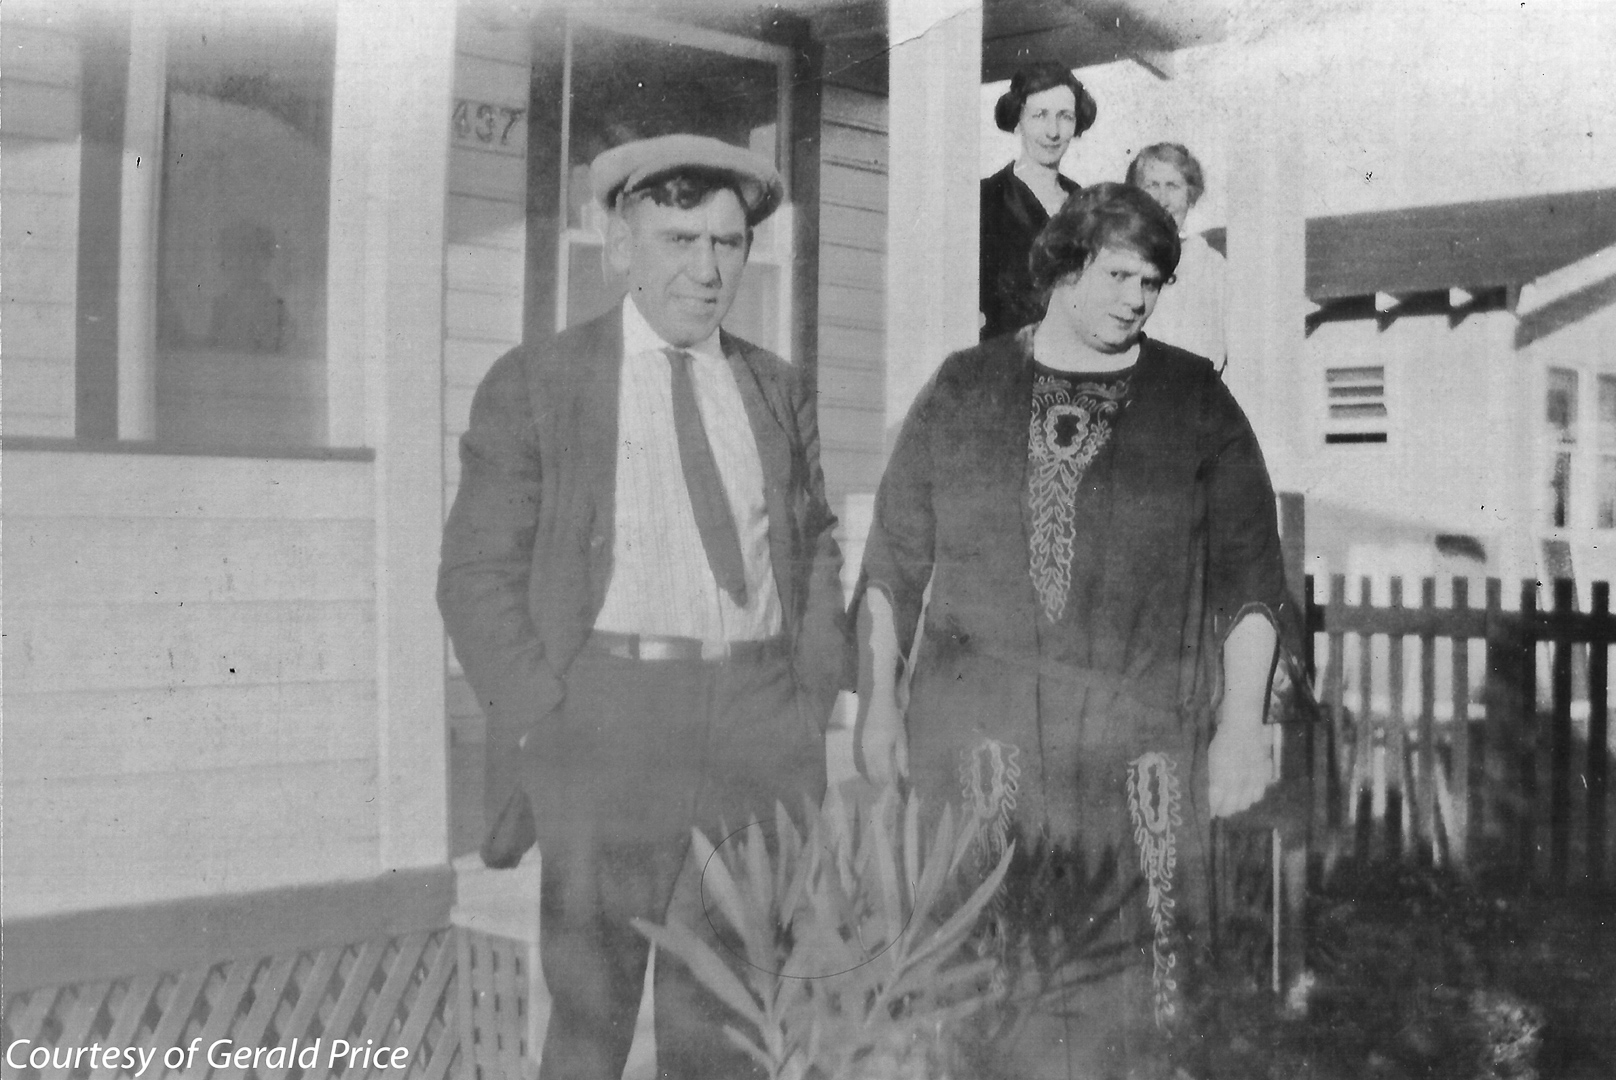 Charles & Margaret Conville Burleycamp [probable] (Compton CA, abt 1925)